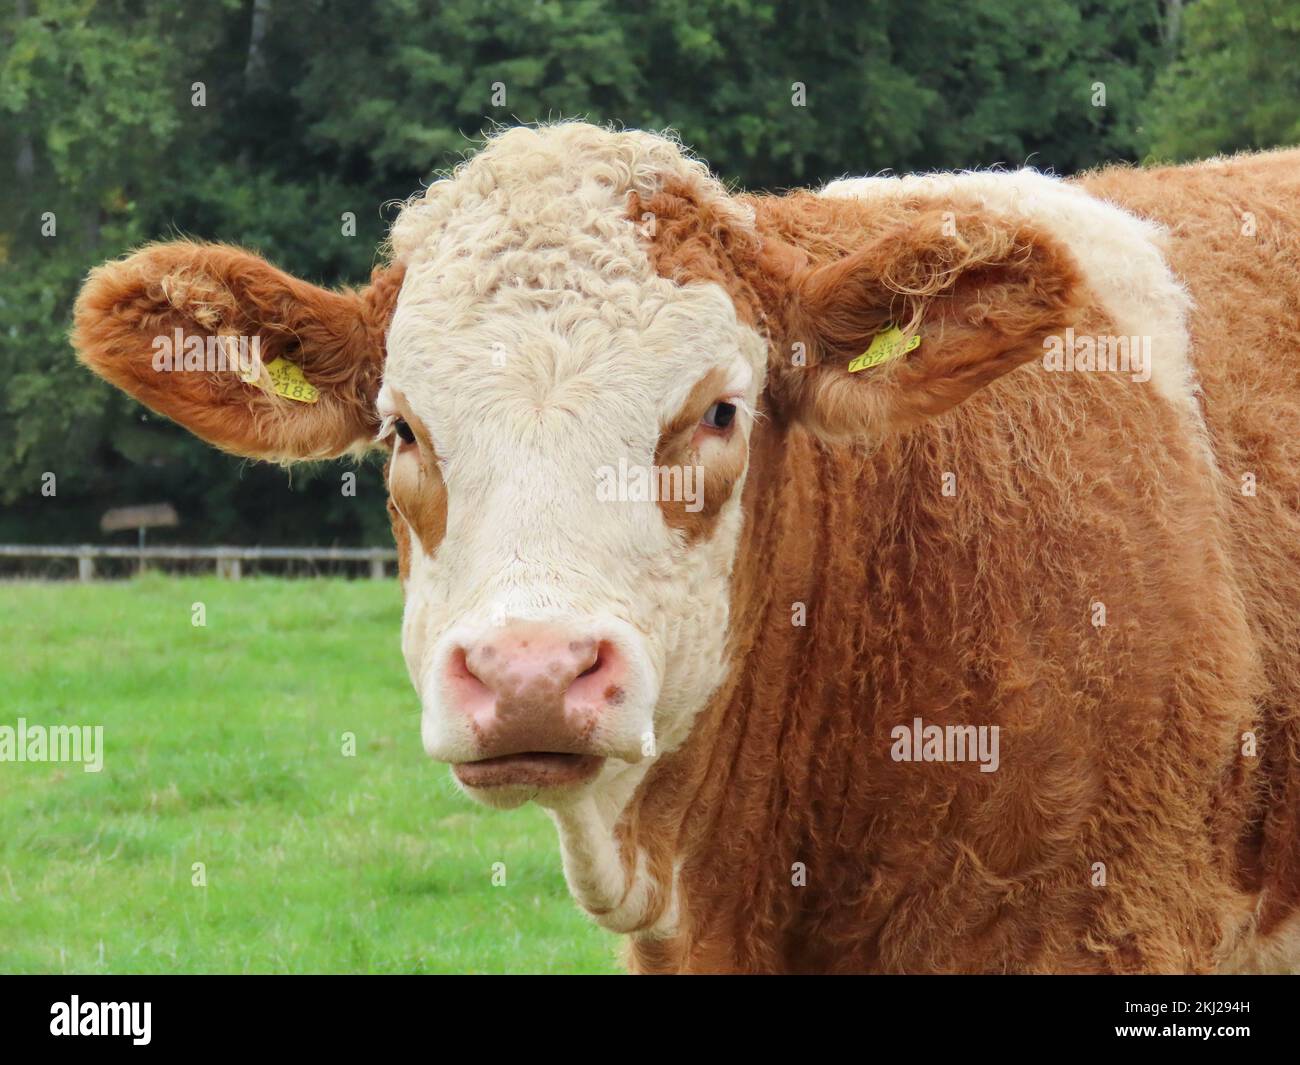 close up portrait of a pretty brown and white cow Stock Photo